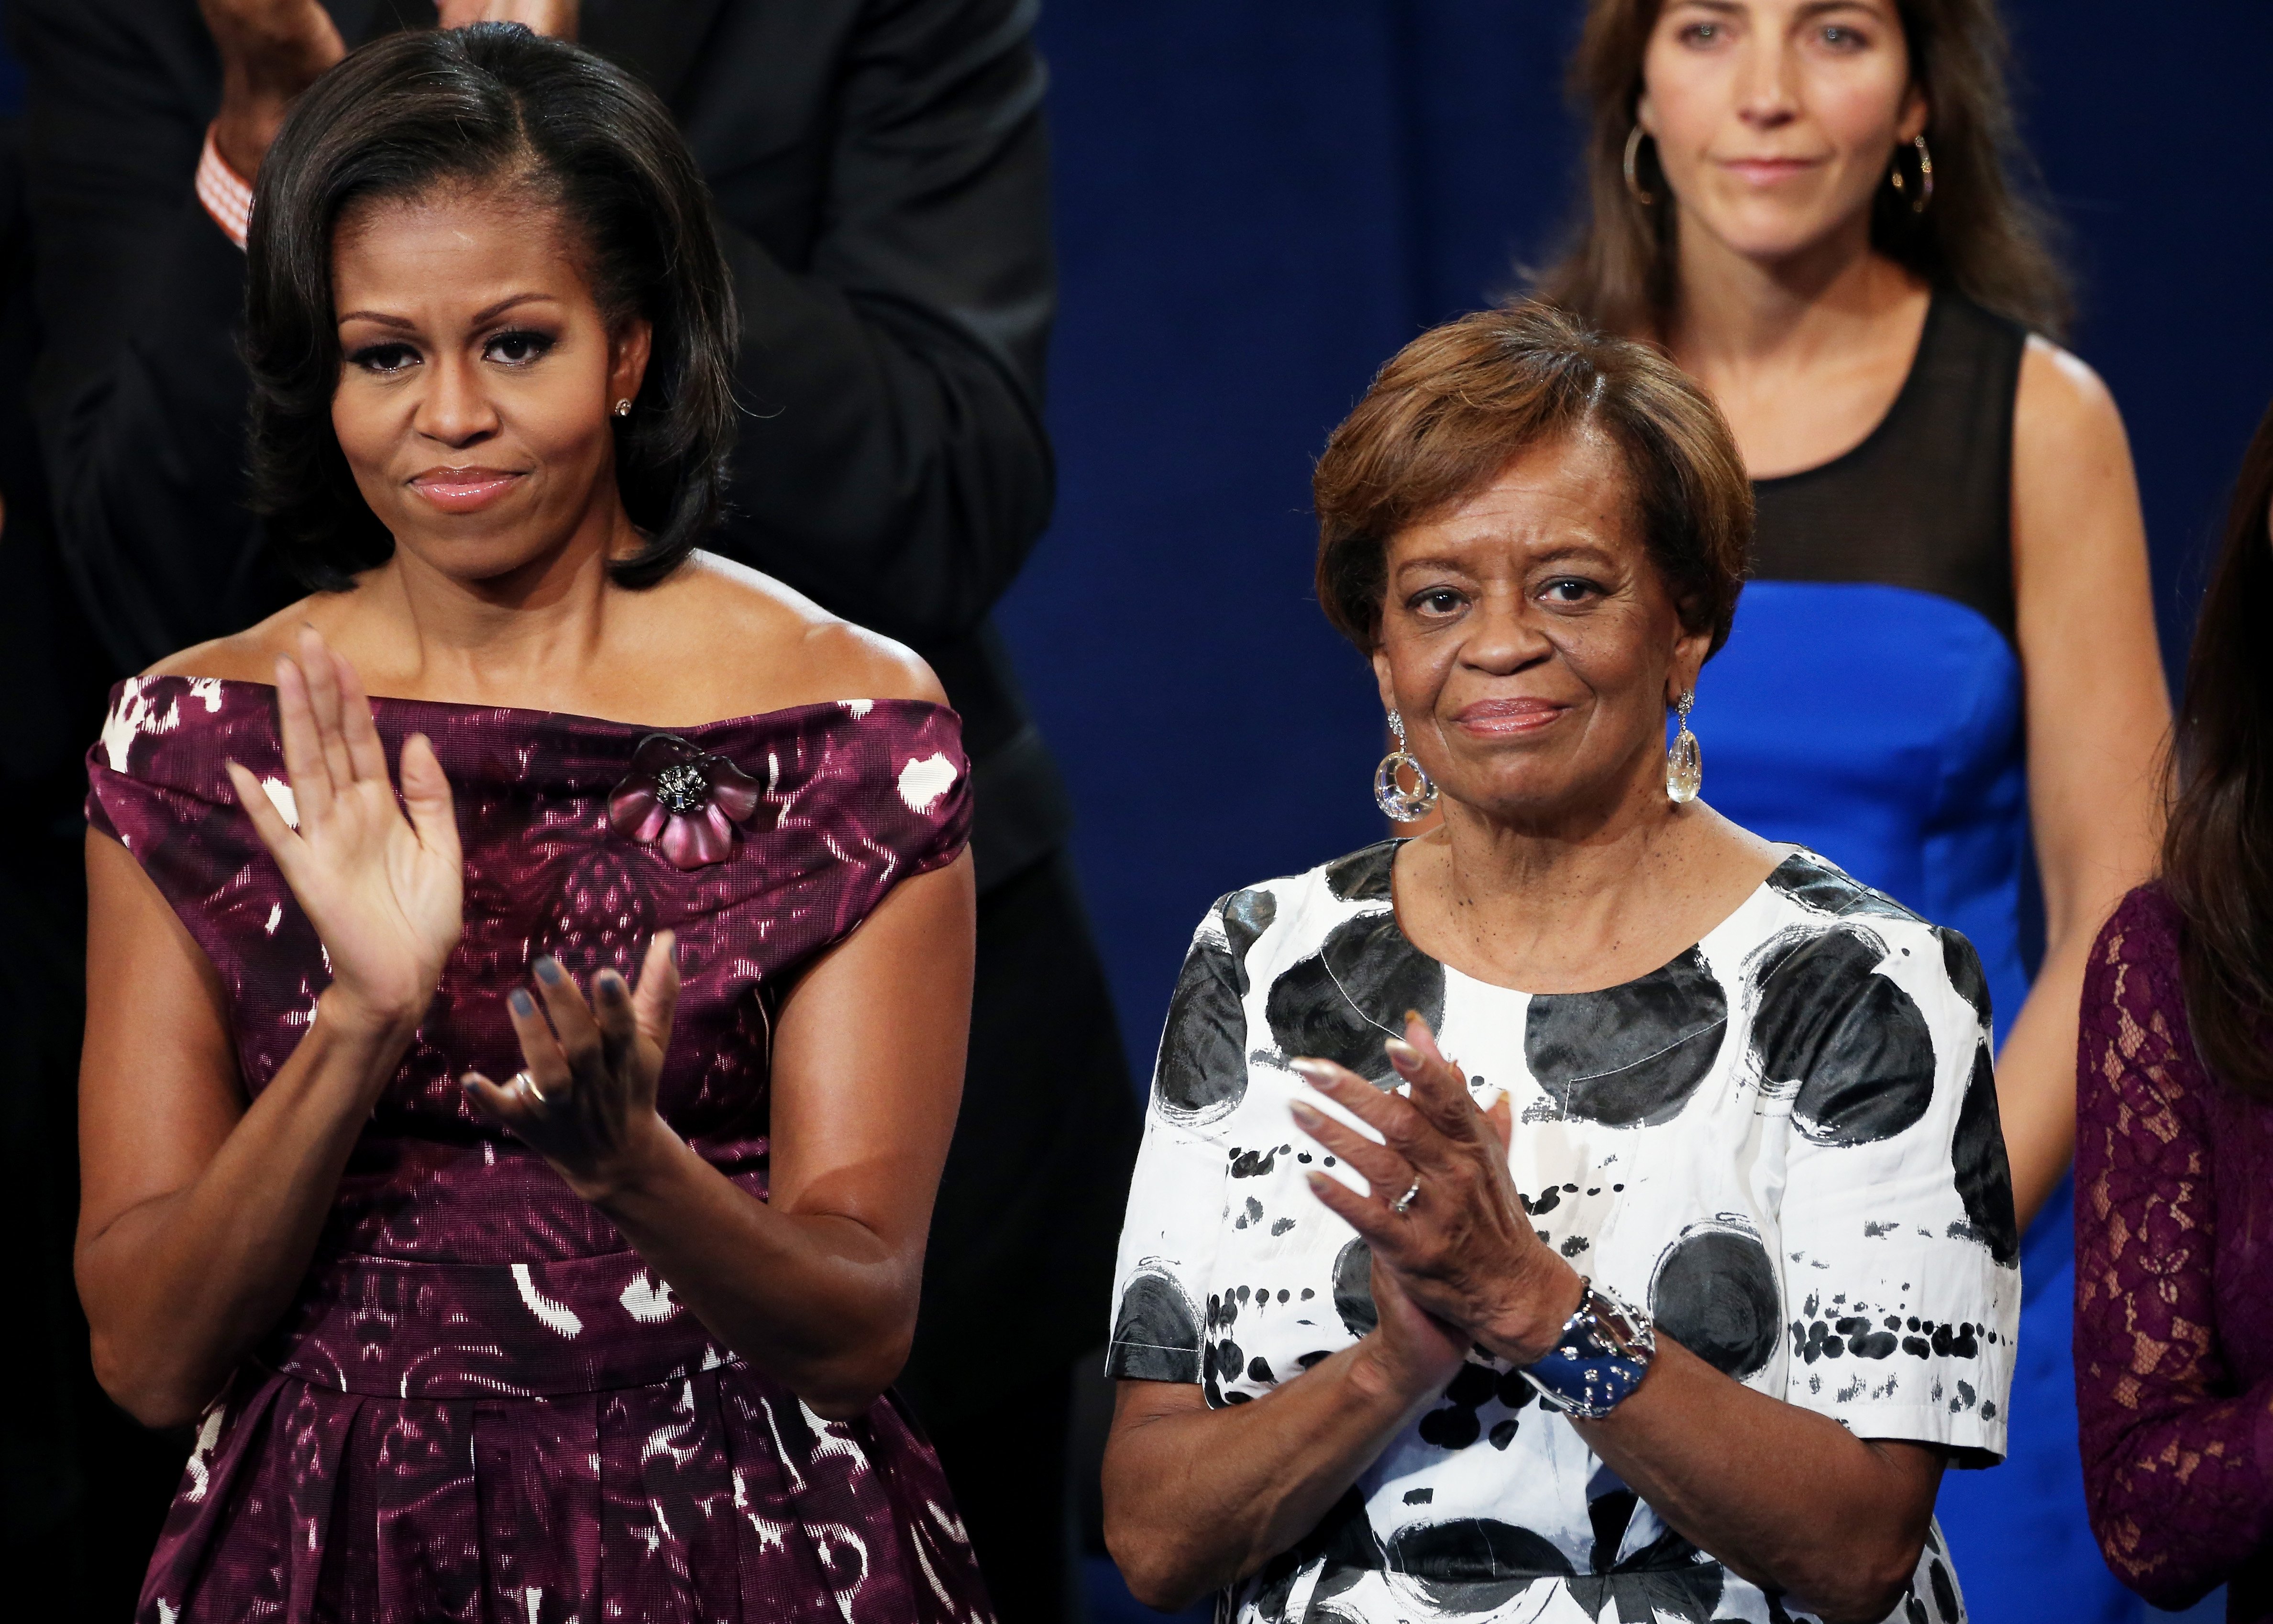 Michelle Obama and her mother Marian Robinson | Photo: Getty Images